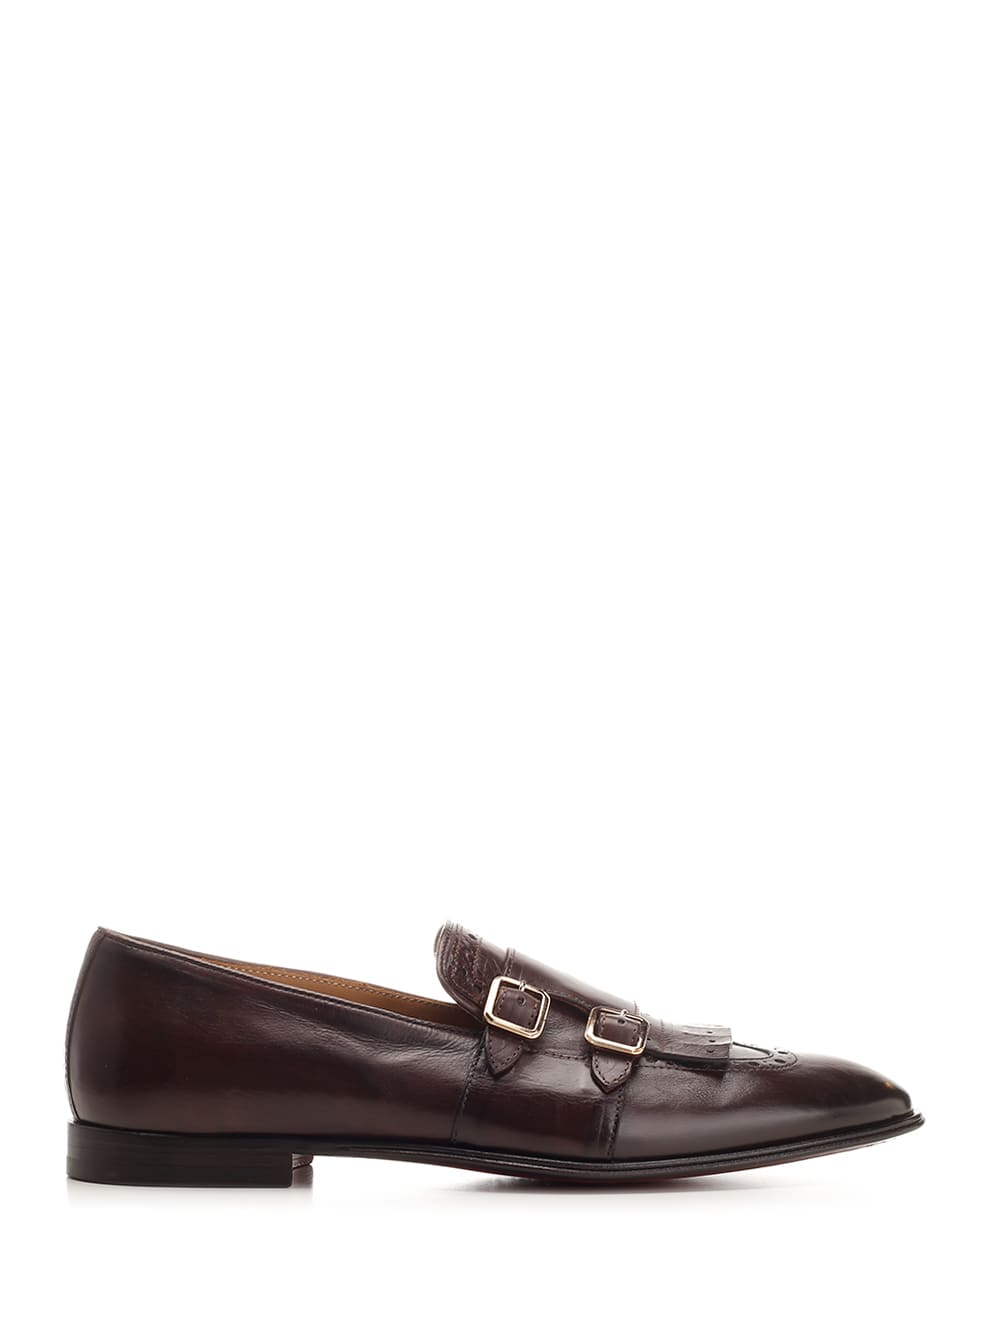 Corvari Double Buckle Loafers In Brown